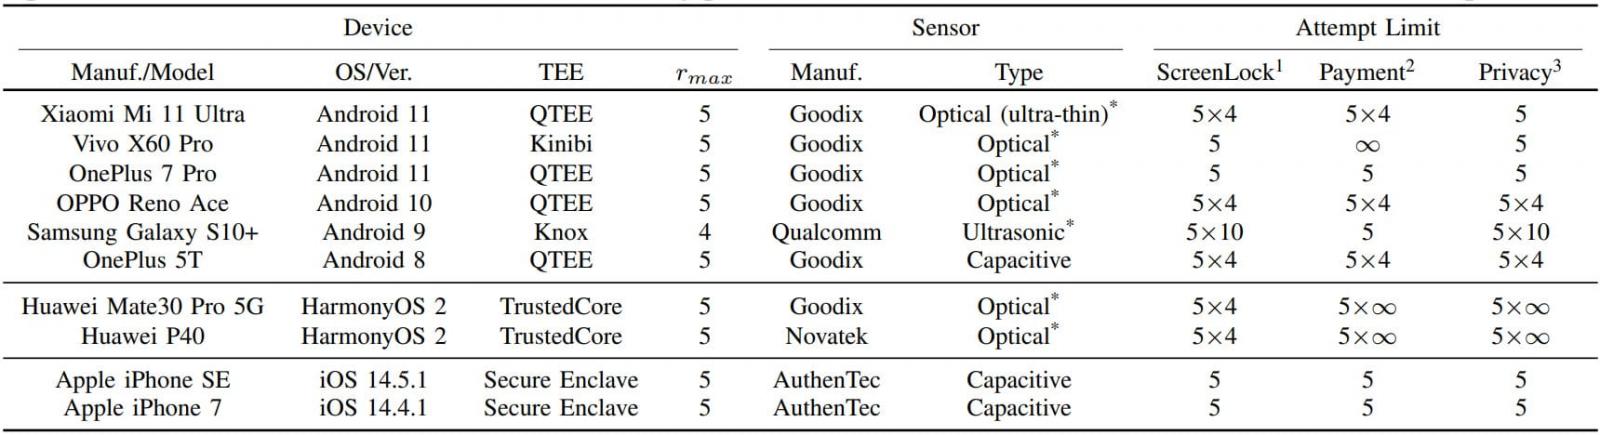 Details of tested devices